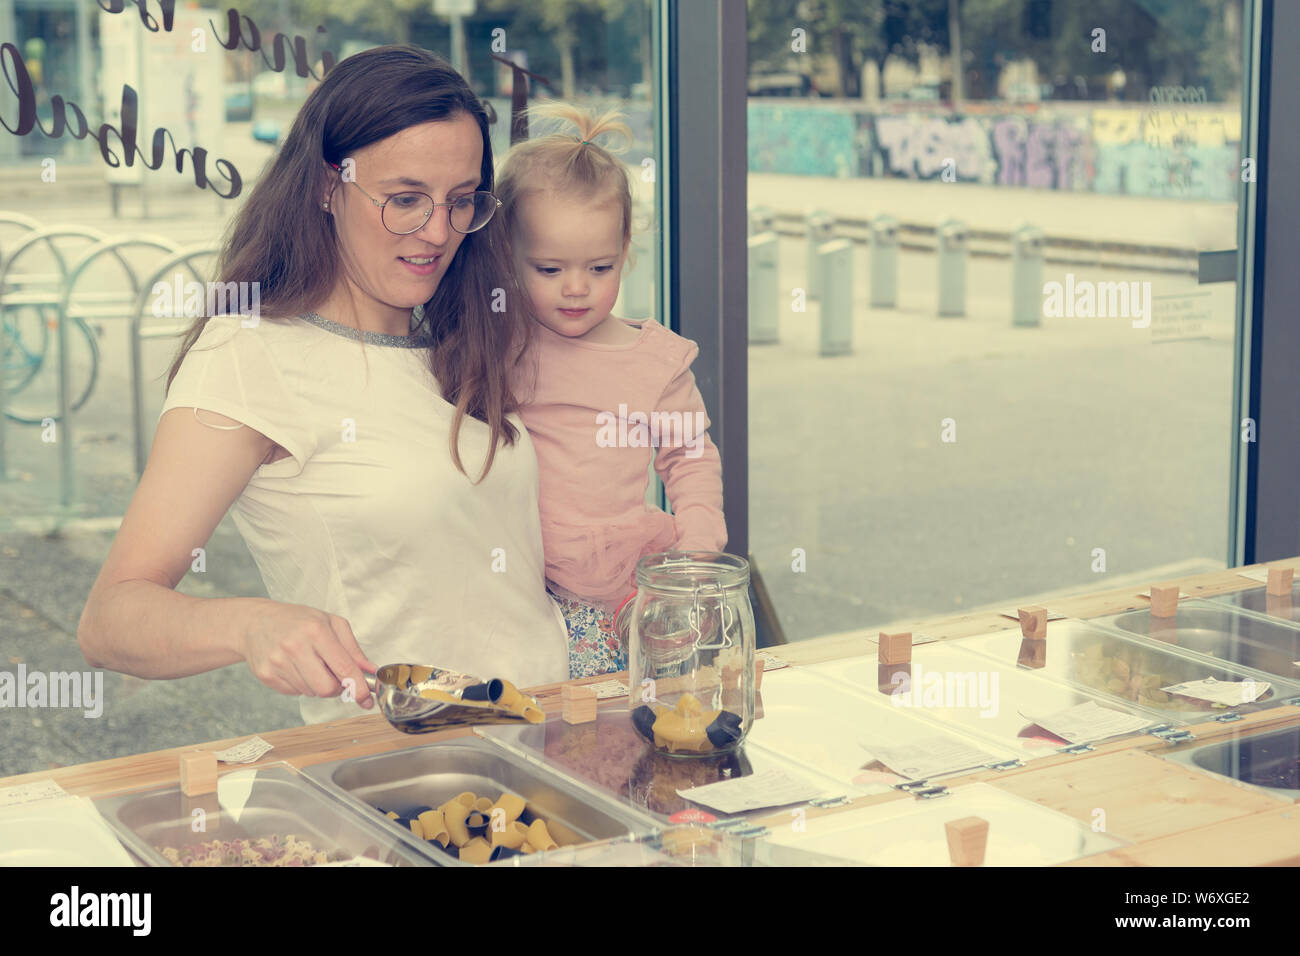 Young mother and daughter shopping in zero waste store. Stock Photo